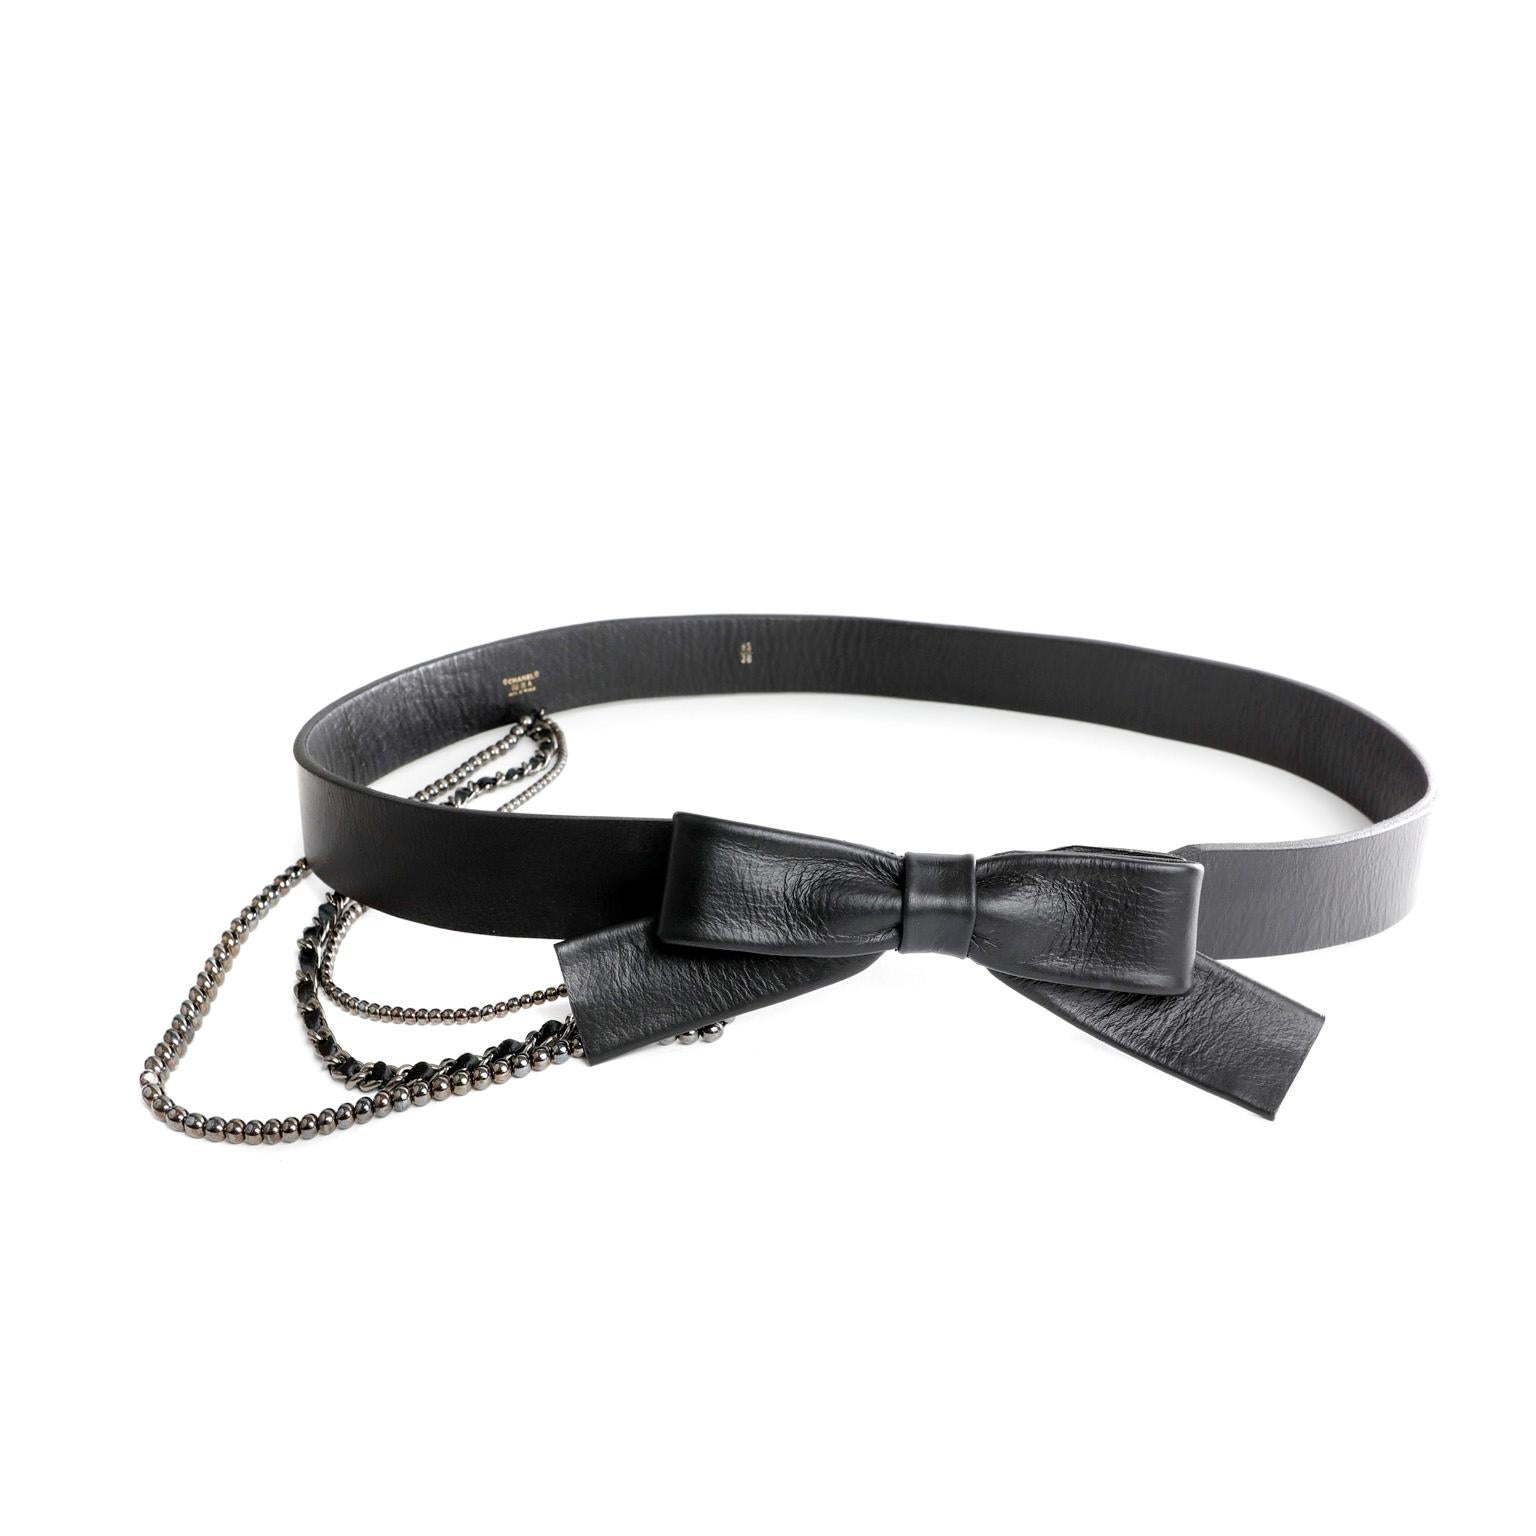 Chanel Black Leather Bow Belt with Chains In Good Condition For Sale In Palm Beach, FL